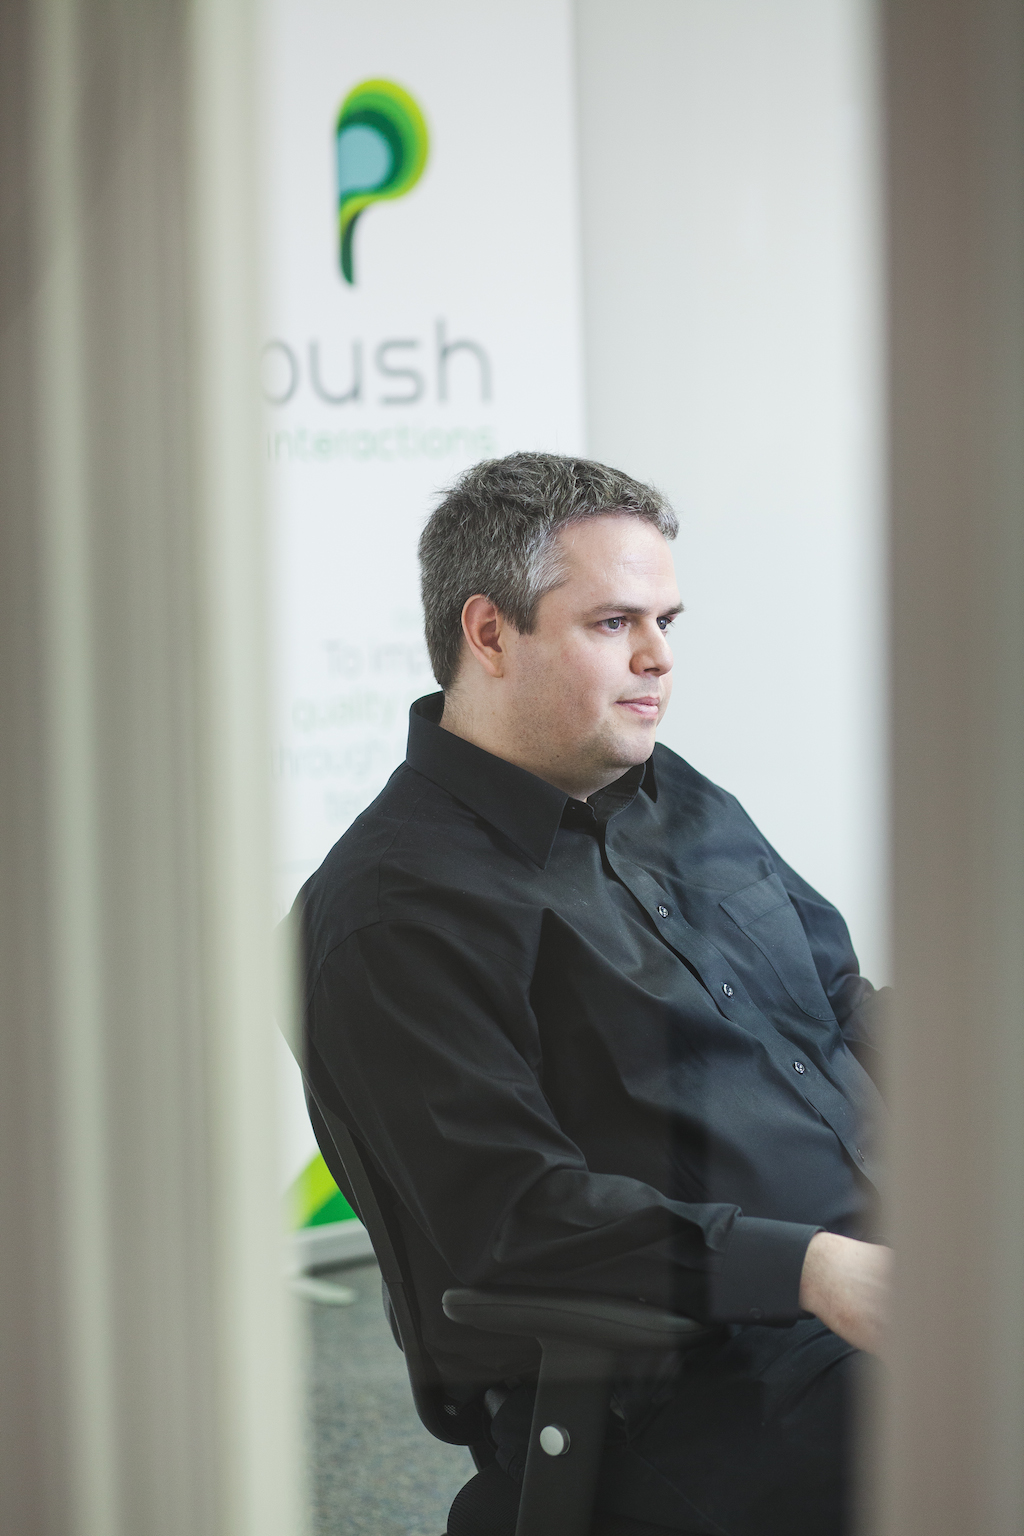 Meet Our Team - Chad Jones - Push Interactions CEO & Founder